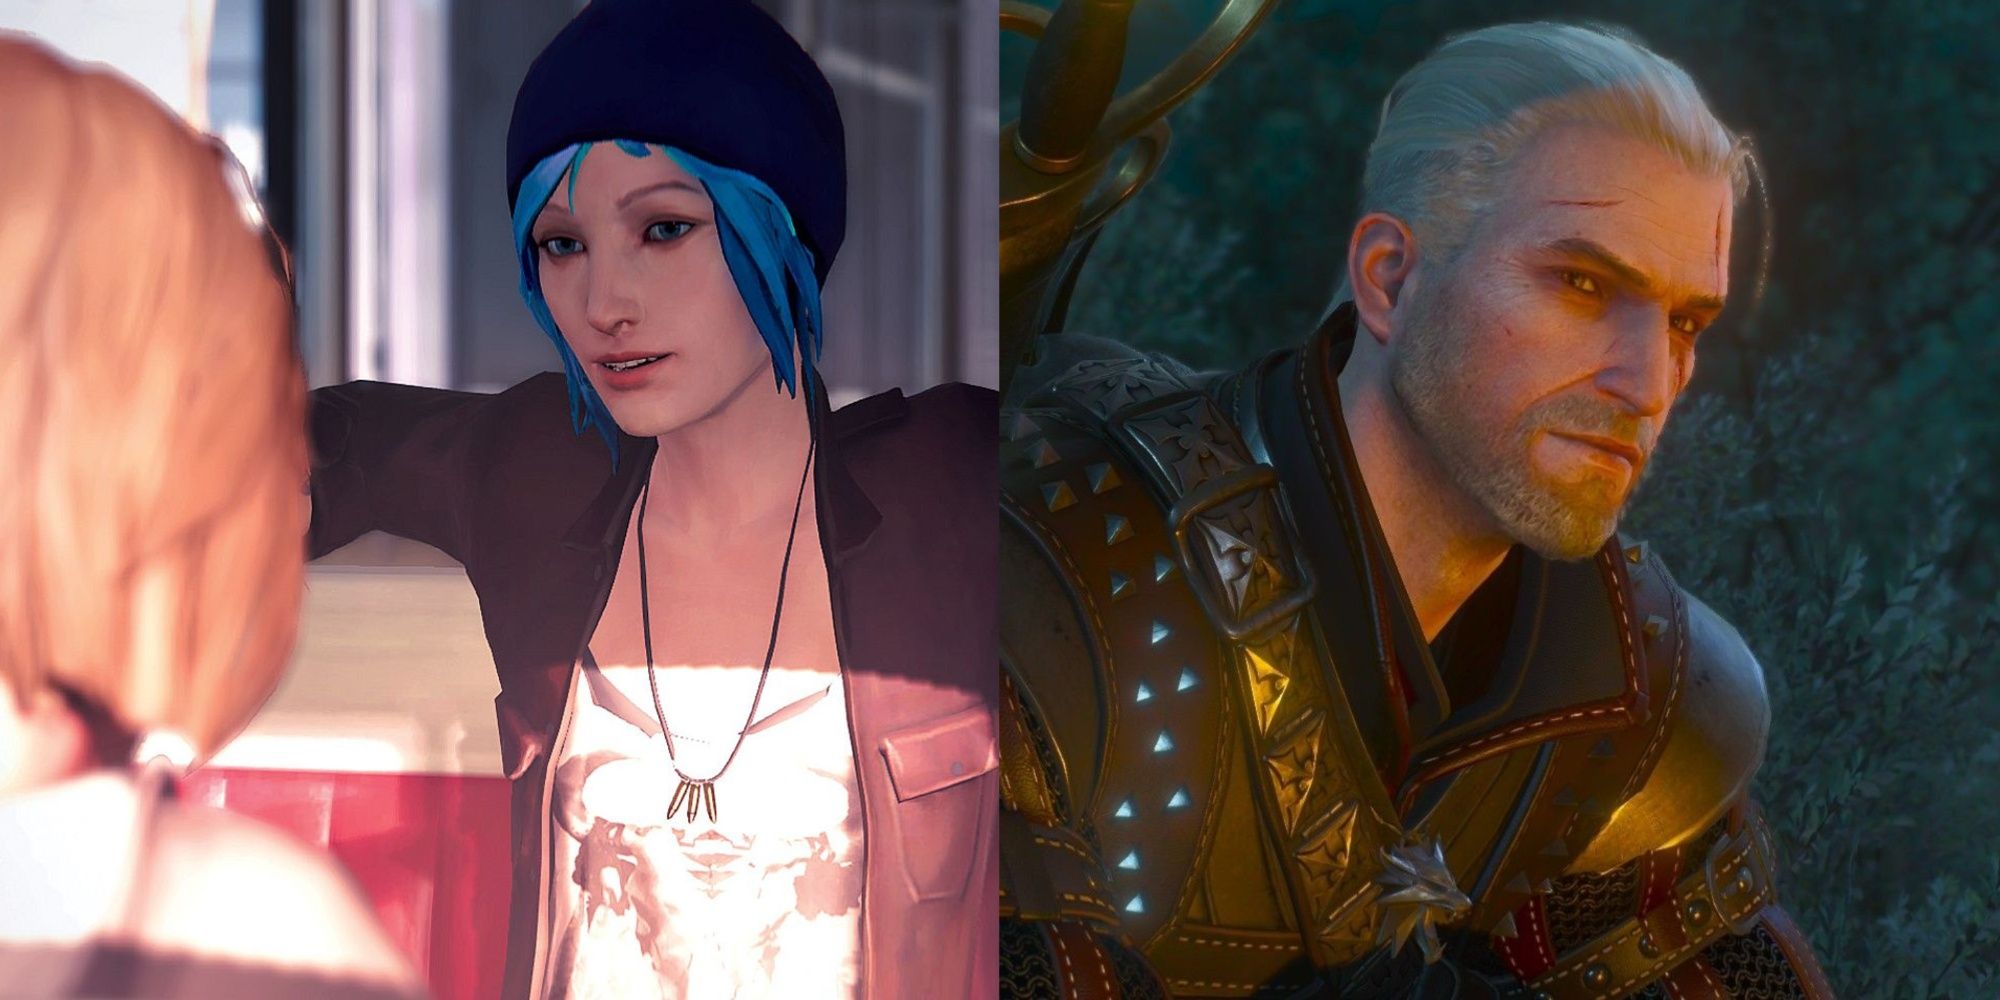 PS4 Games With The Best Storylines Featured Split Image Of Chloe From Life Is Strange and Geralt From the Witcher 3